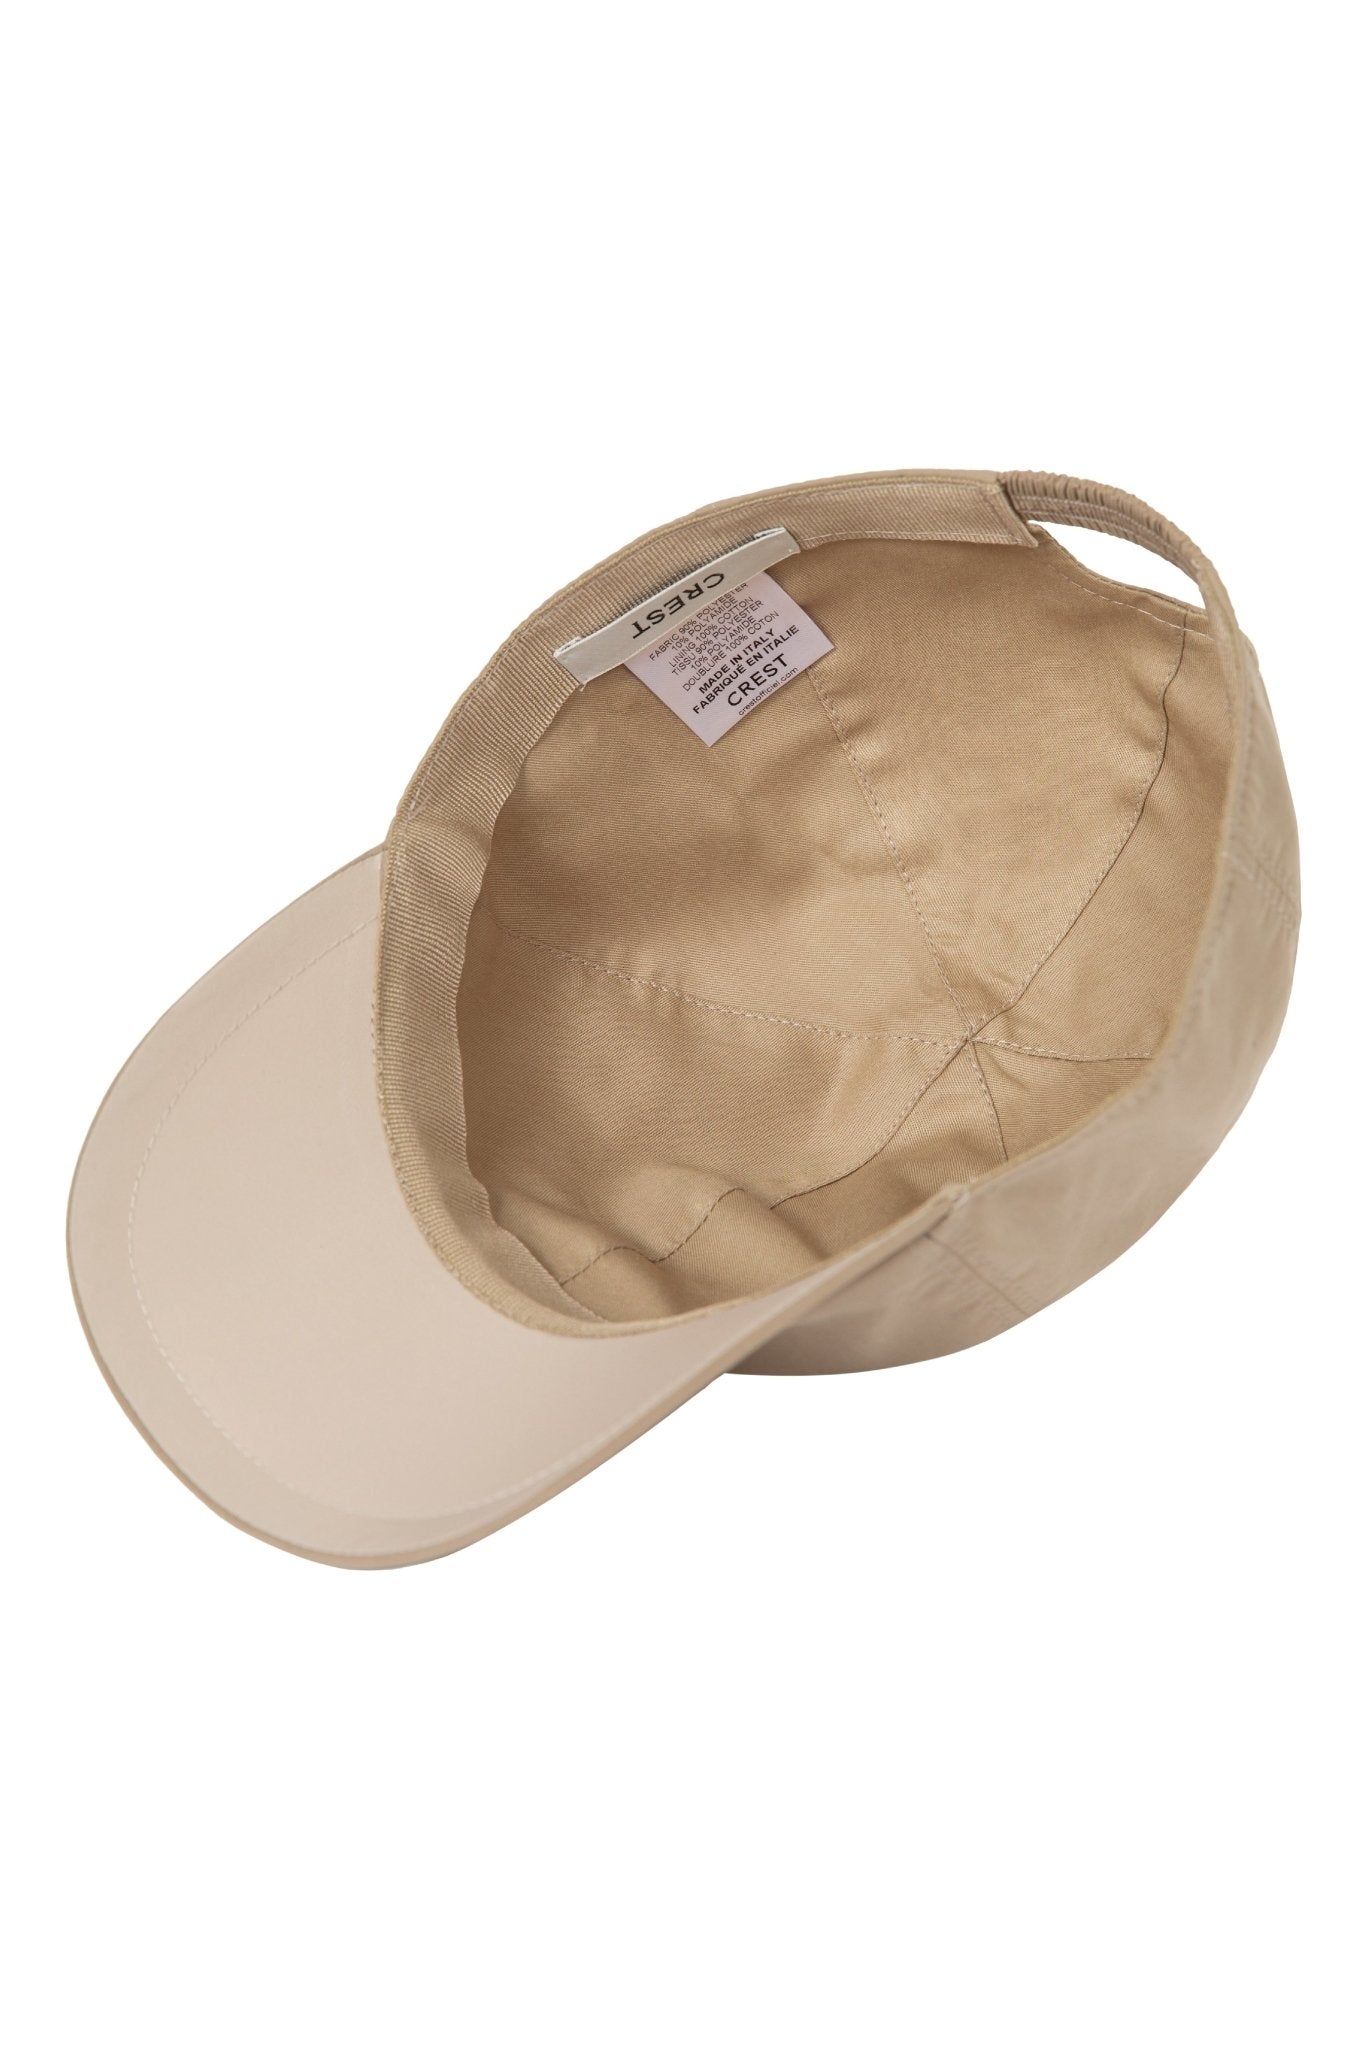 Interior view of CREST beige baseball cap, featuring 100% cotton lining for comfort.